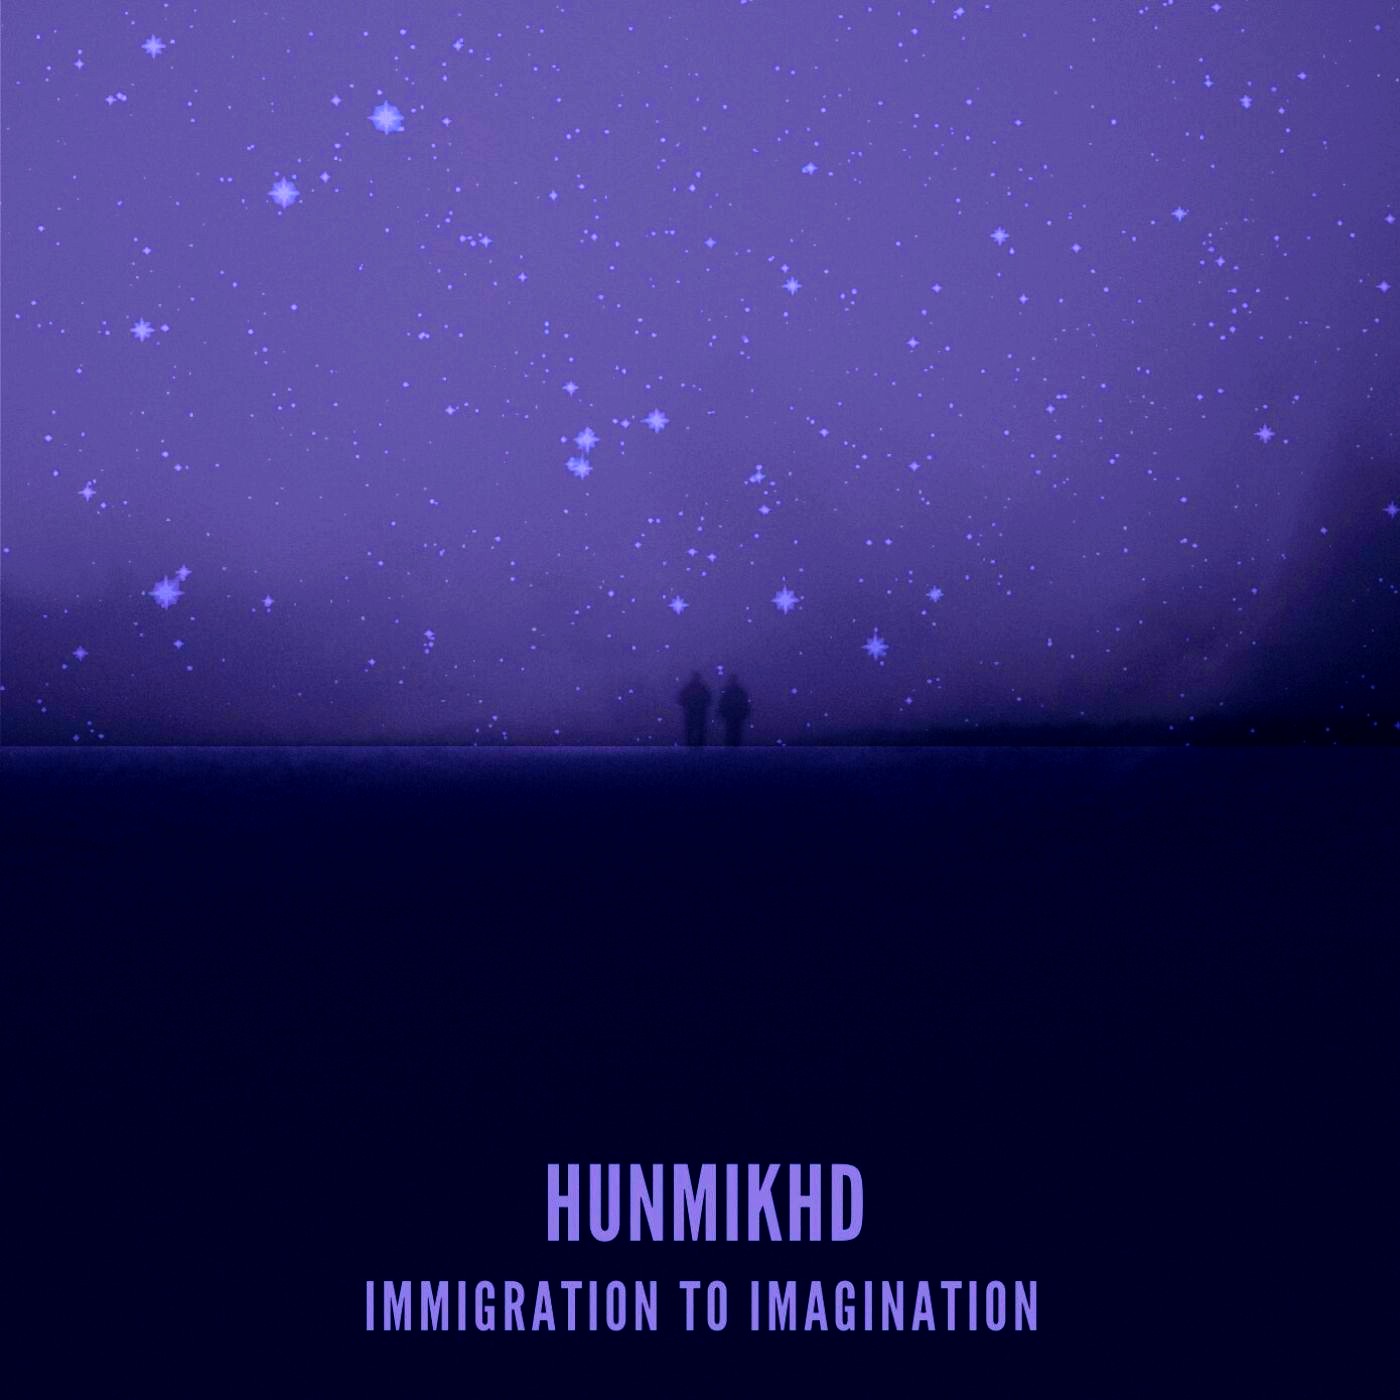 Immigration to Imagination